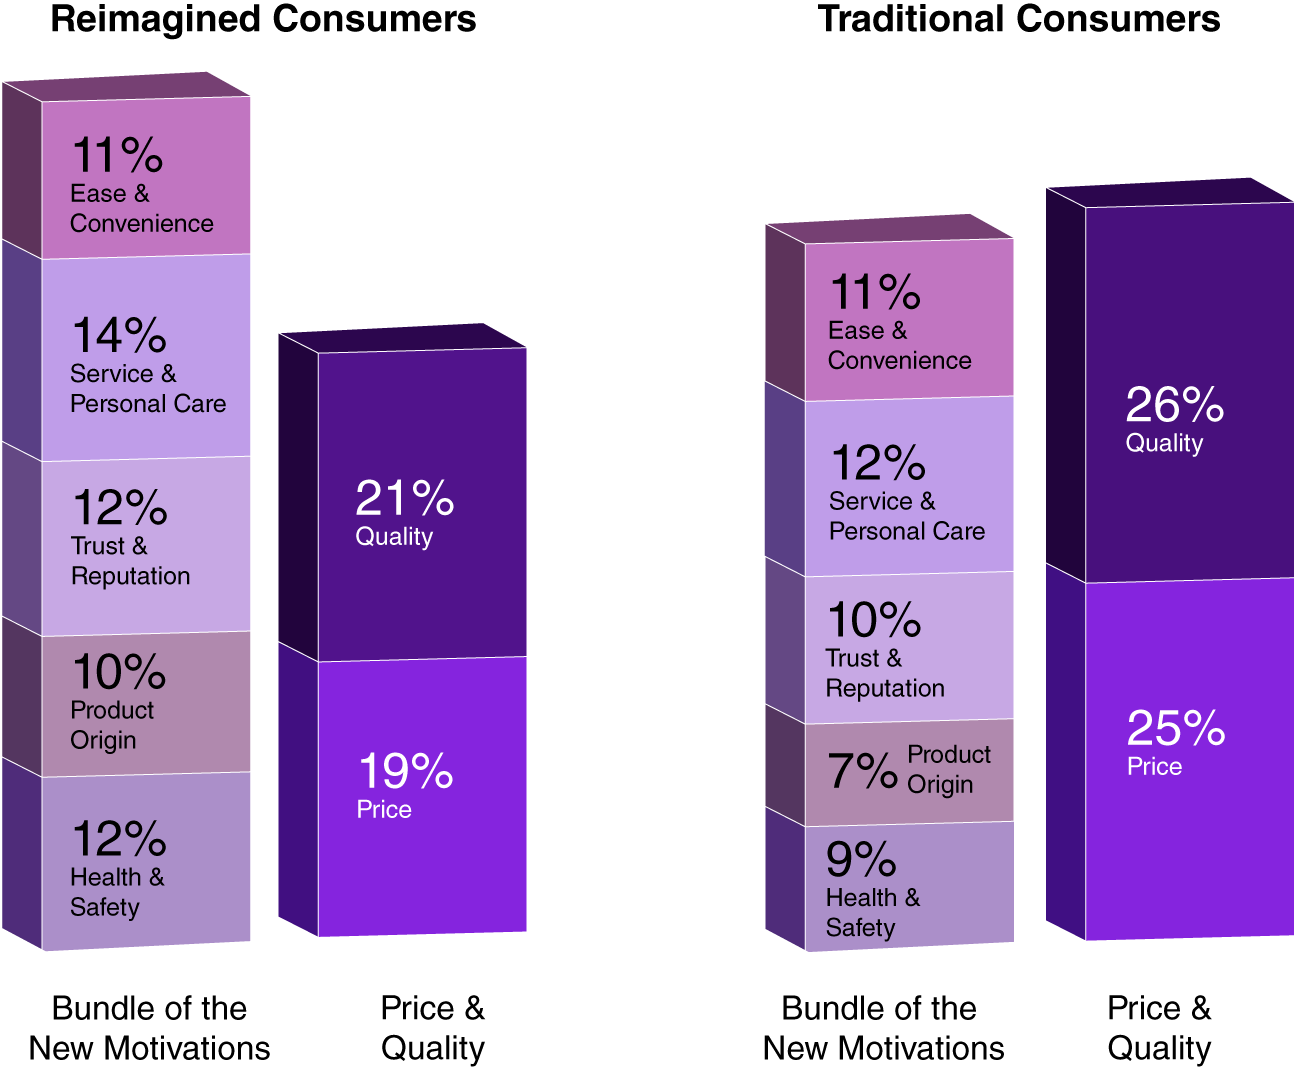 Bar charts depicts the price & quality of Reimagined Consumers and Reimagined Consumers.